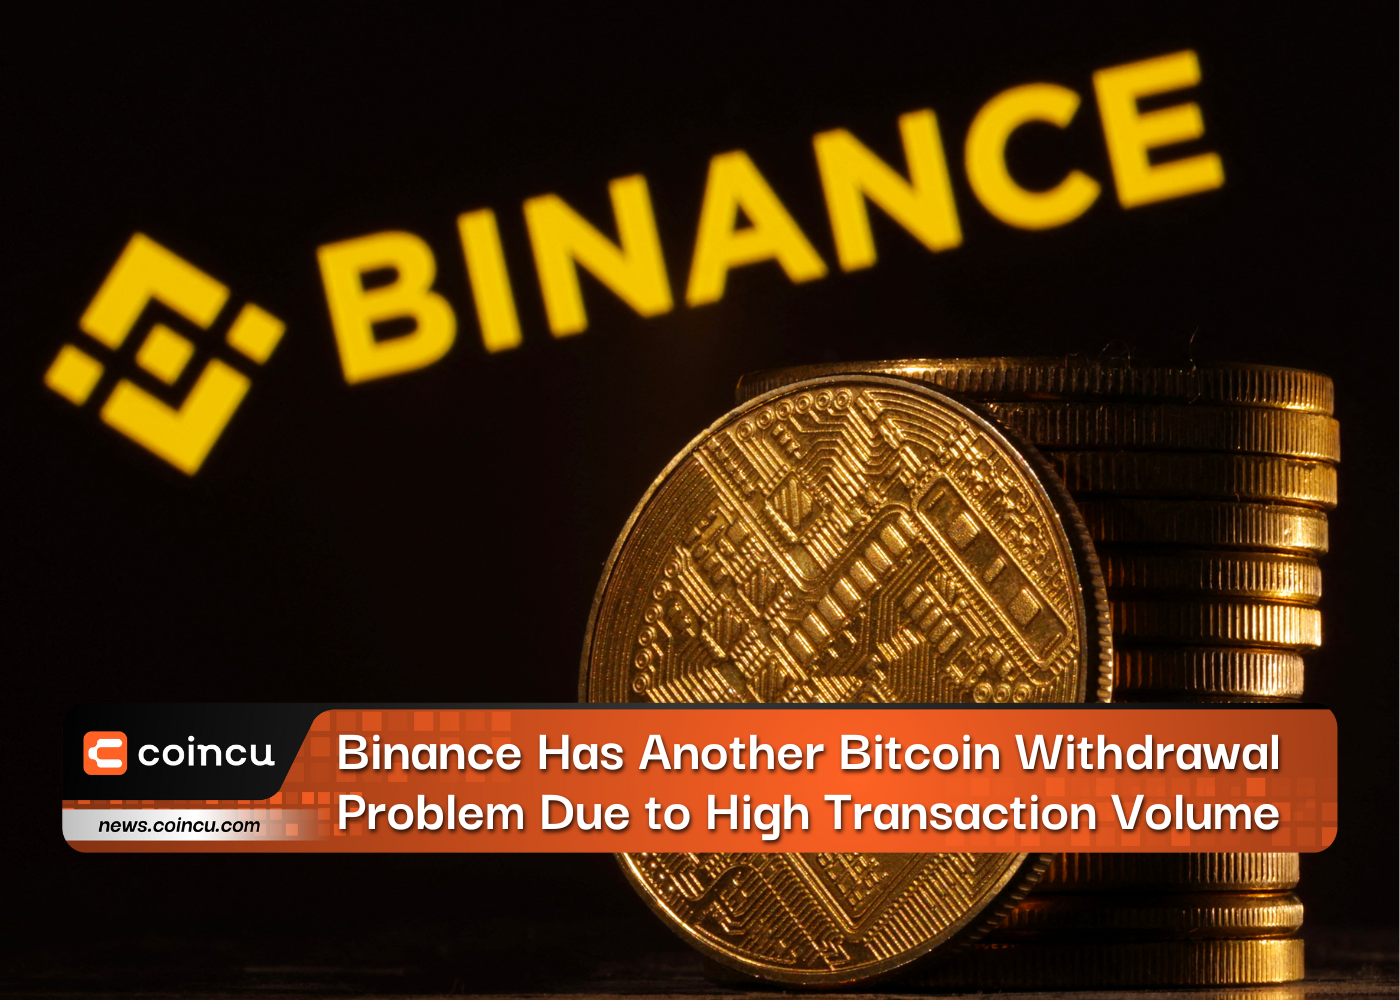 Binance Has Another Bitcoin Withdrawal Problem Due to High Transaction Volume